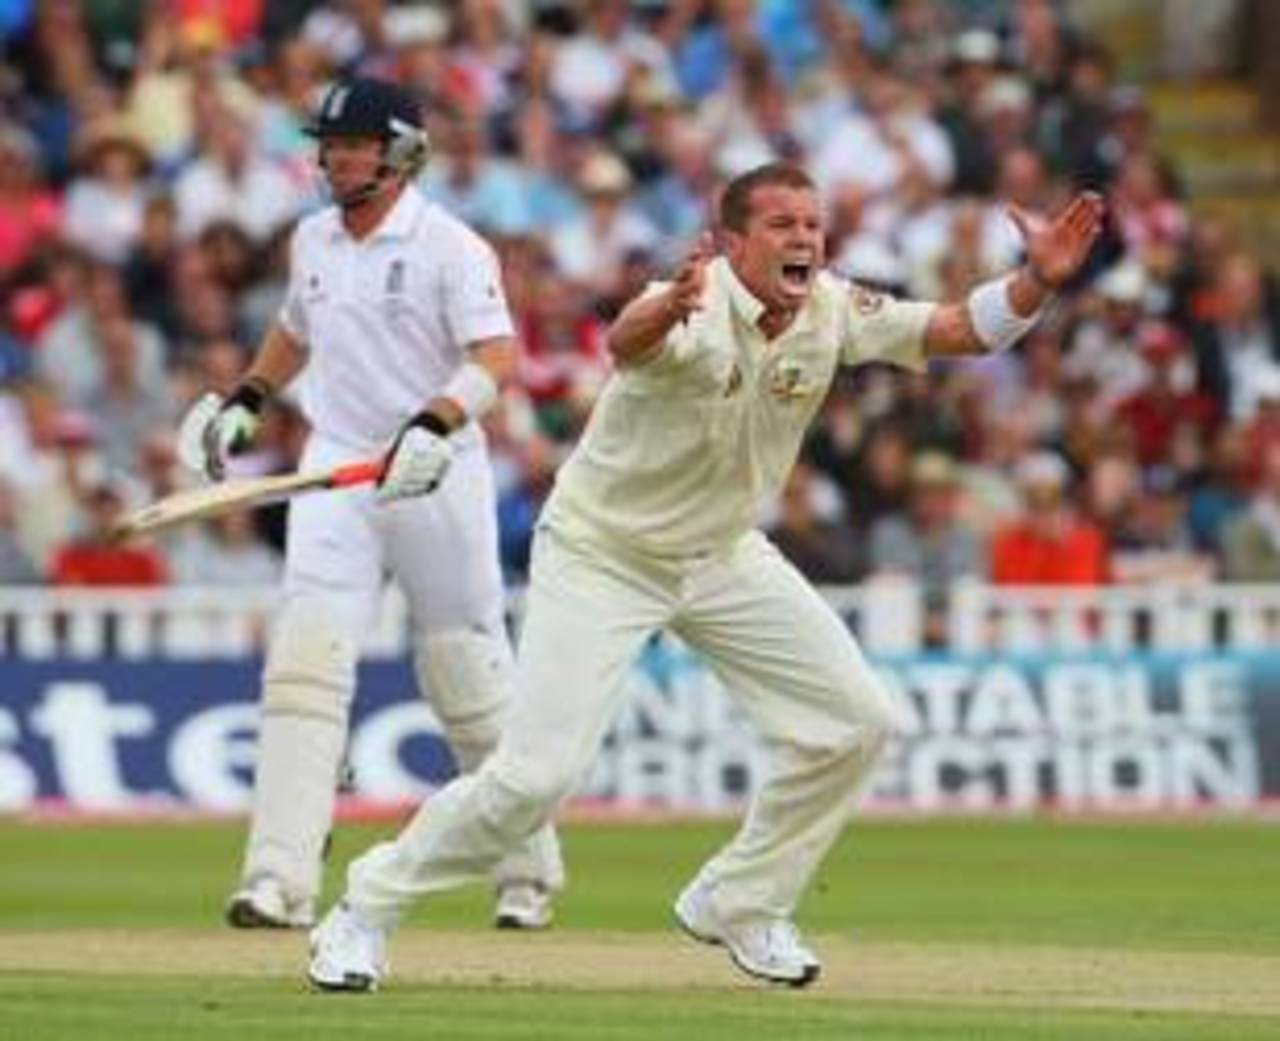 Peter Siddle lets out a huge appeal against Ian Bell, England v Australia, 3rd Test, Edgbaston, 3rd day, August 2, 2009